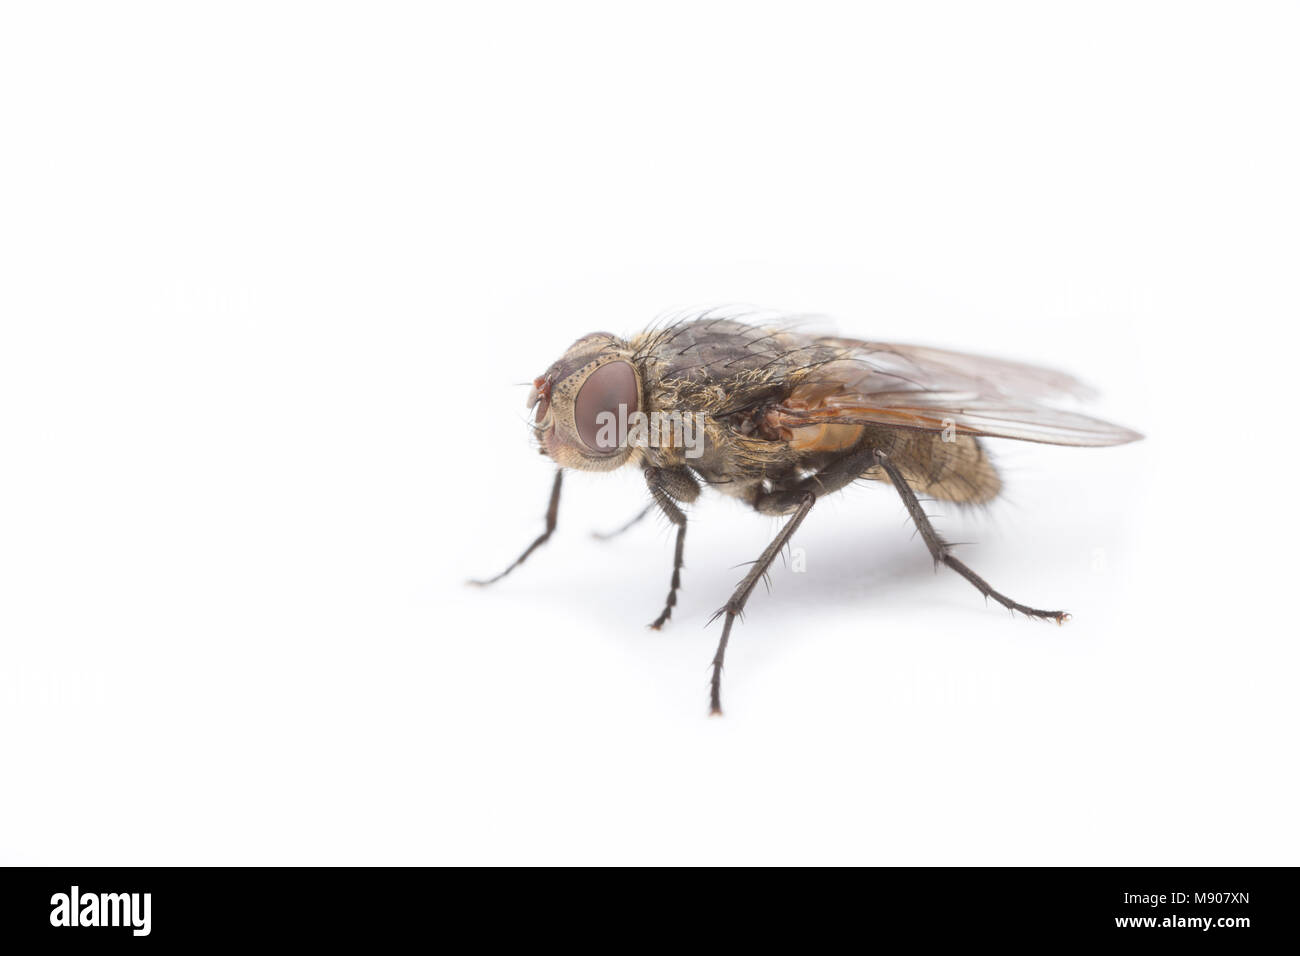 A live Cluster fly, Pollenia rudis, on a white background. These flies can infest homes in large numbers. England UK GB Stock Photo